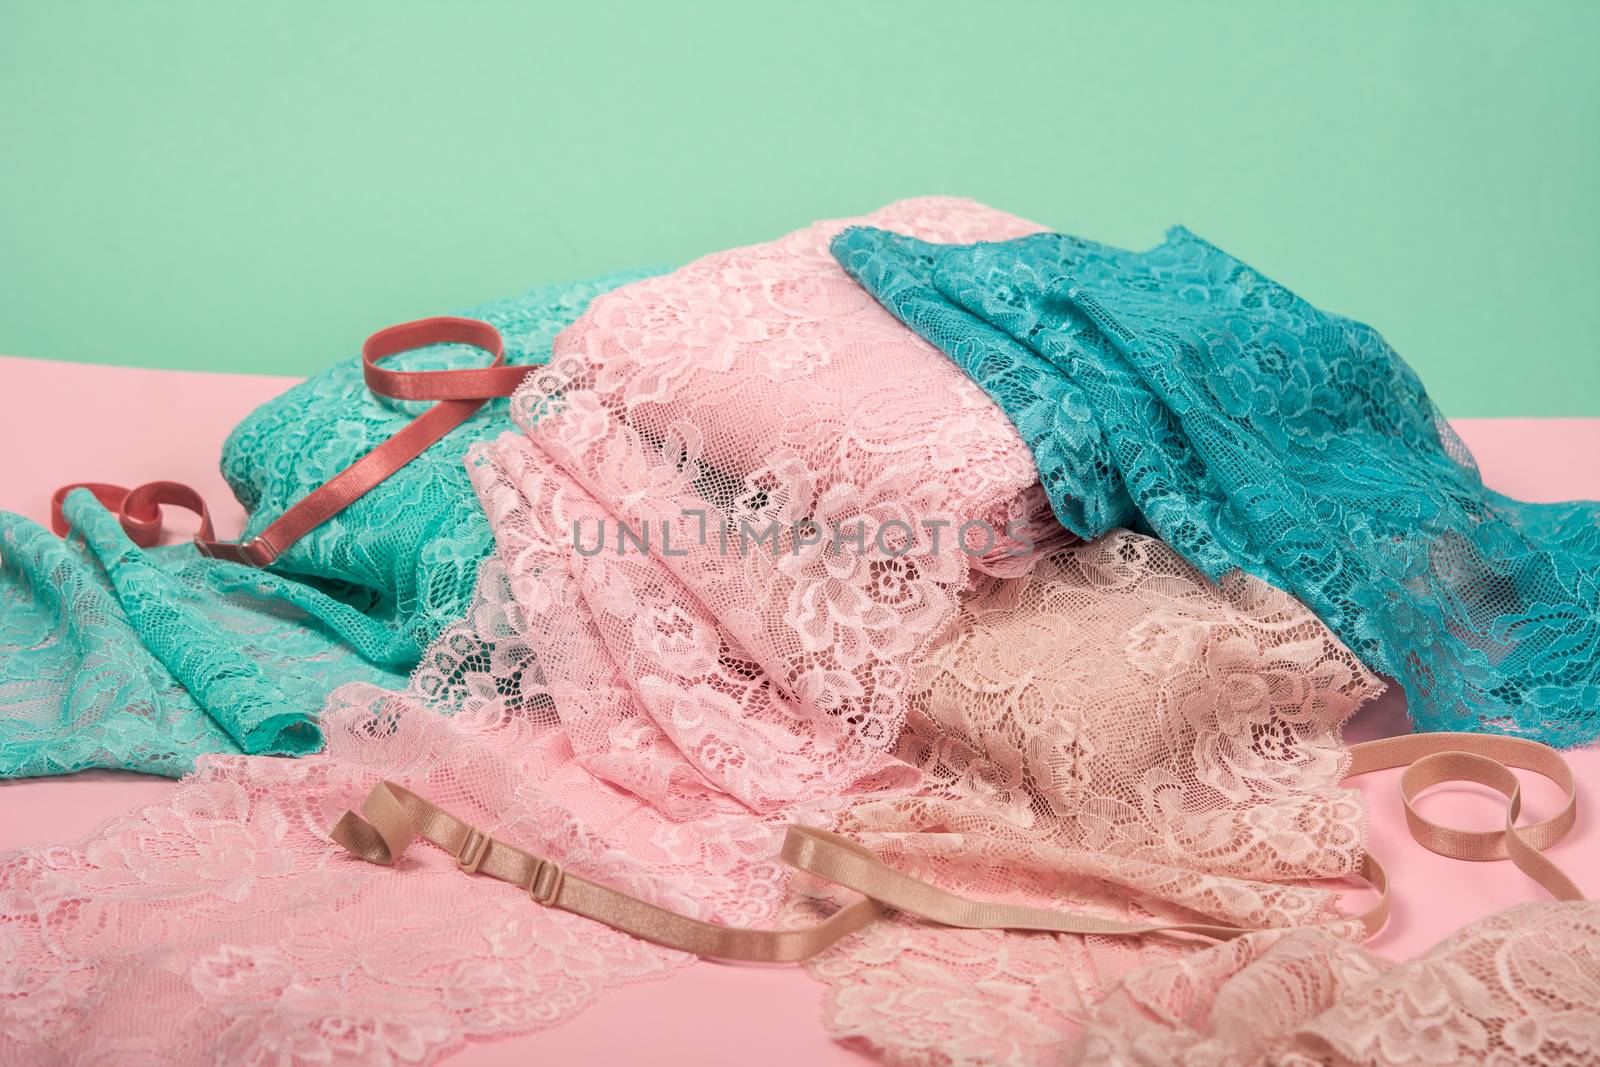 pile of color rich bright lace for Lingerie, panties, and bras on pink background by polyats